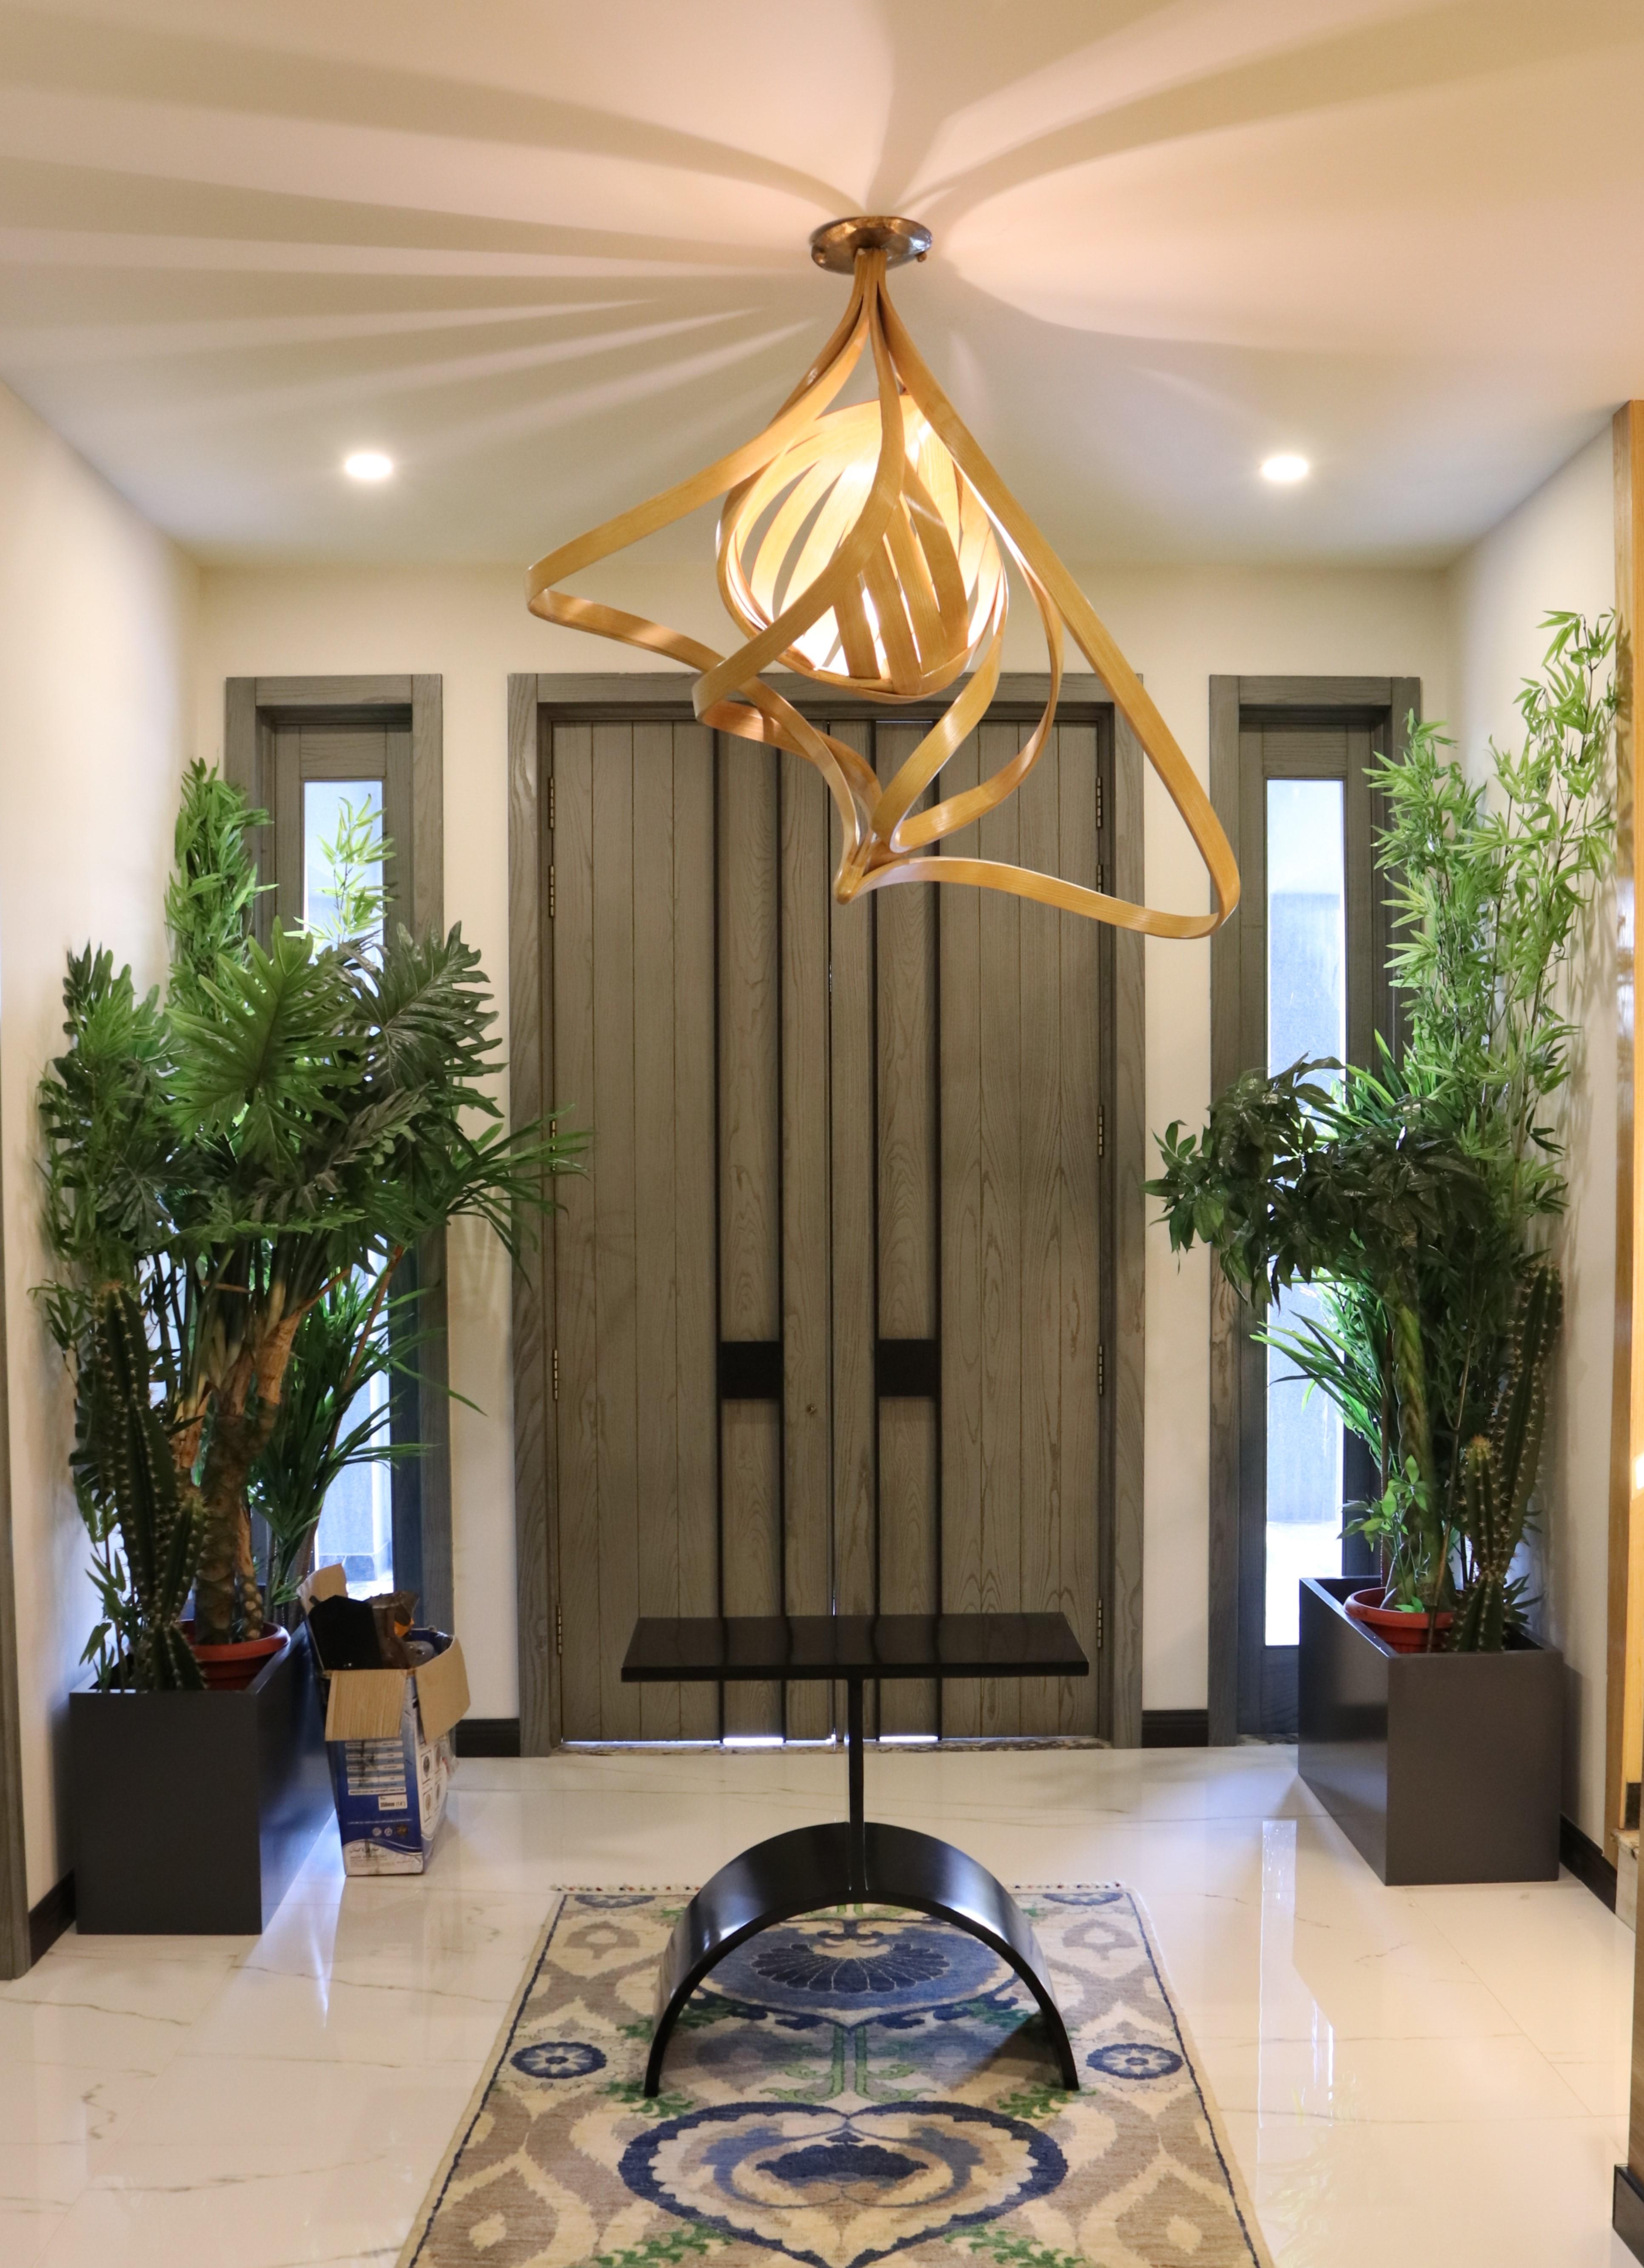 A chandelier made in solid ashwood using wood bending techniques. A single light is placed in a wooden cocoon which releases light with linear gaps creating a distinct lighting ambiance. This is further layered with bentwood designs surrounding the